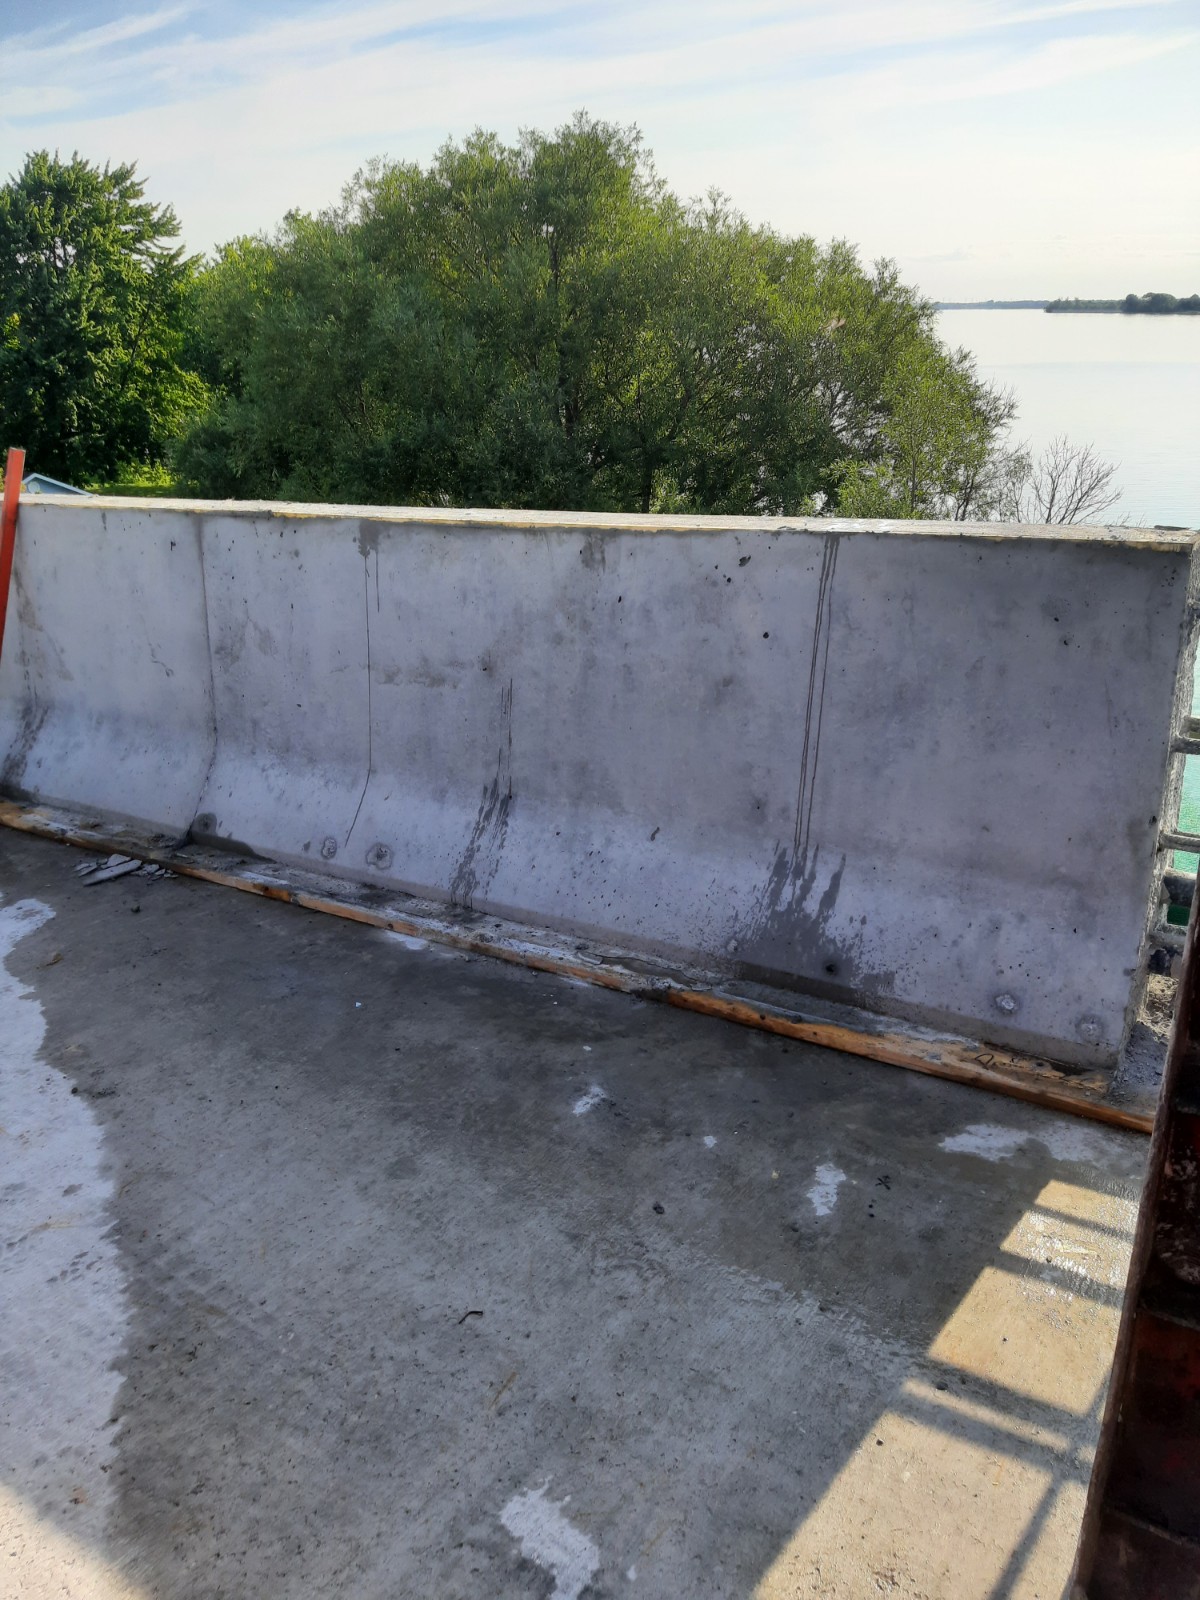 Section of completed barrier wall